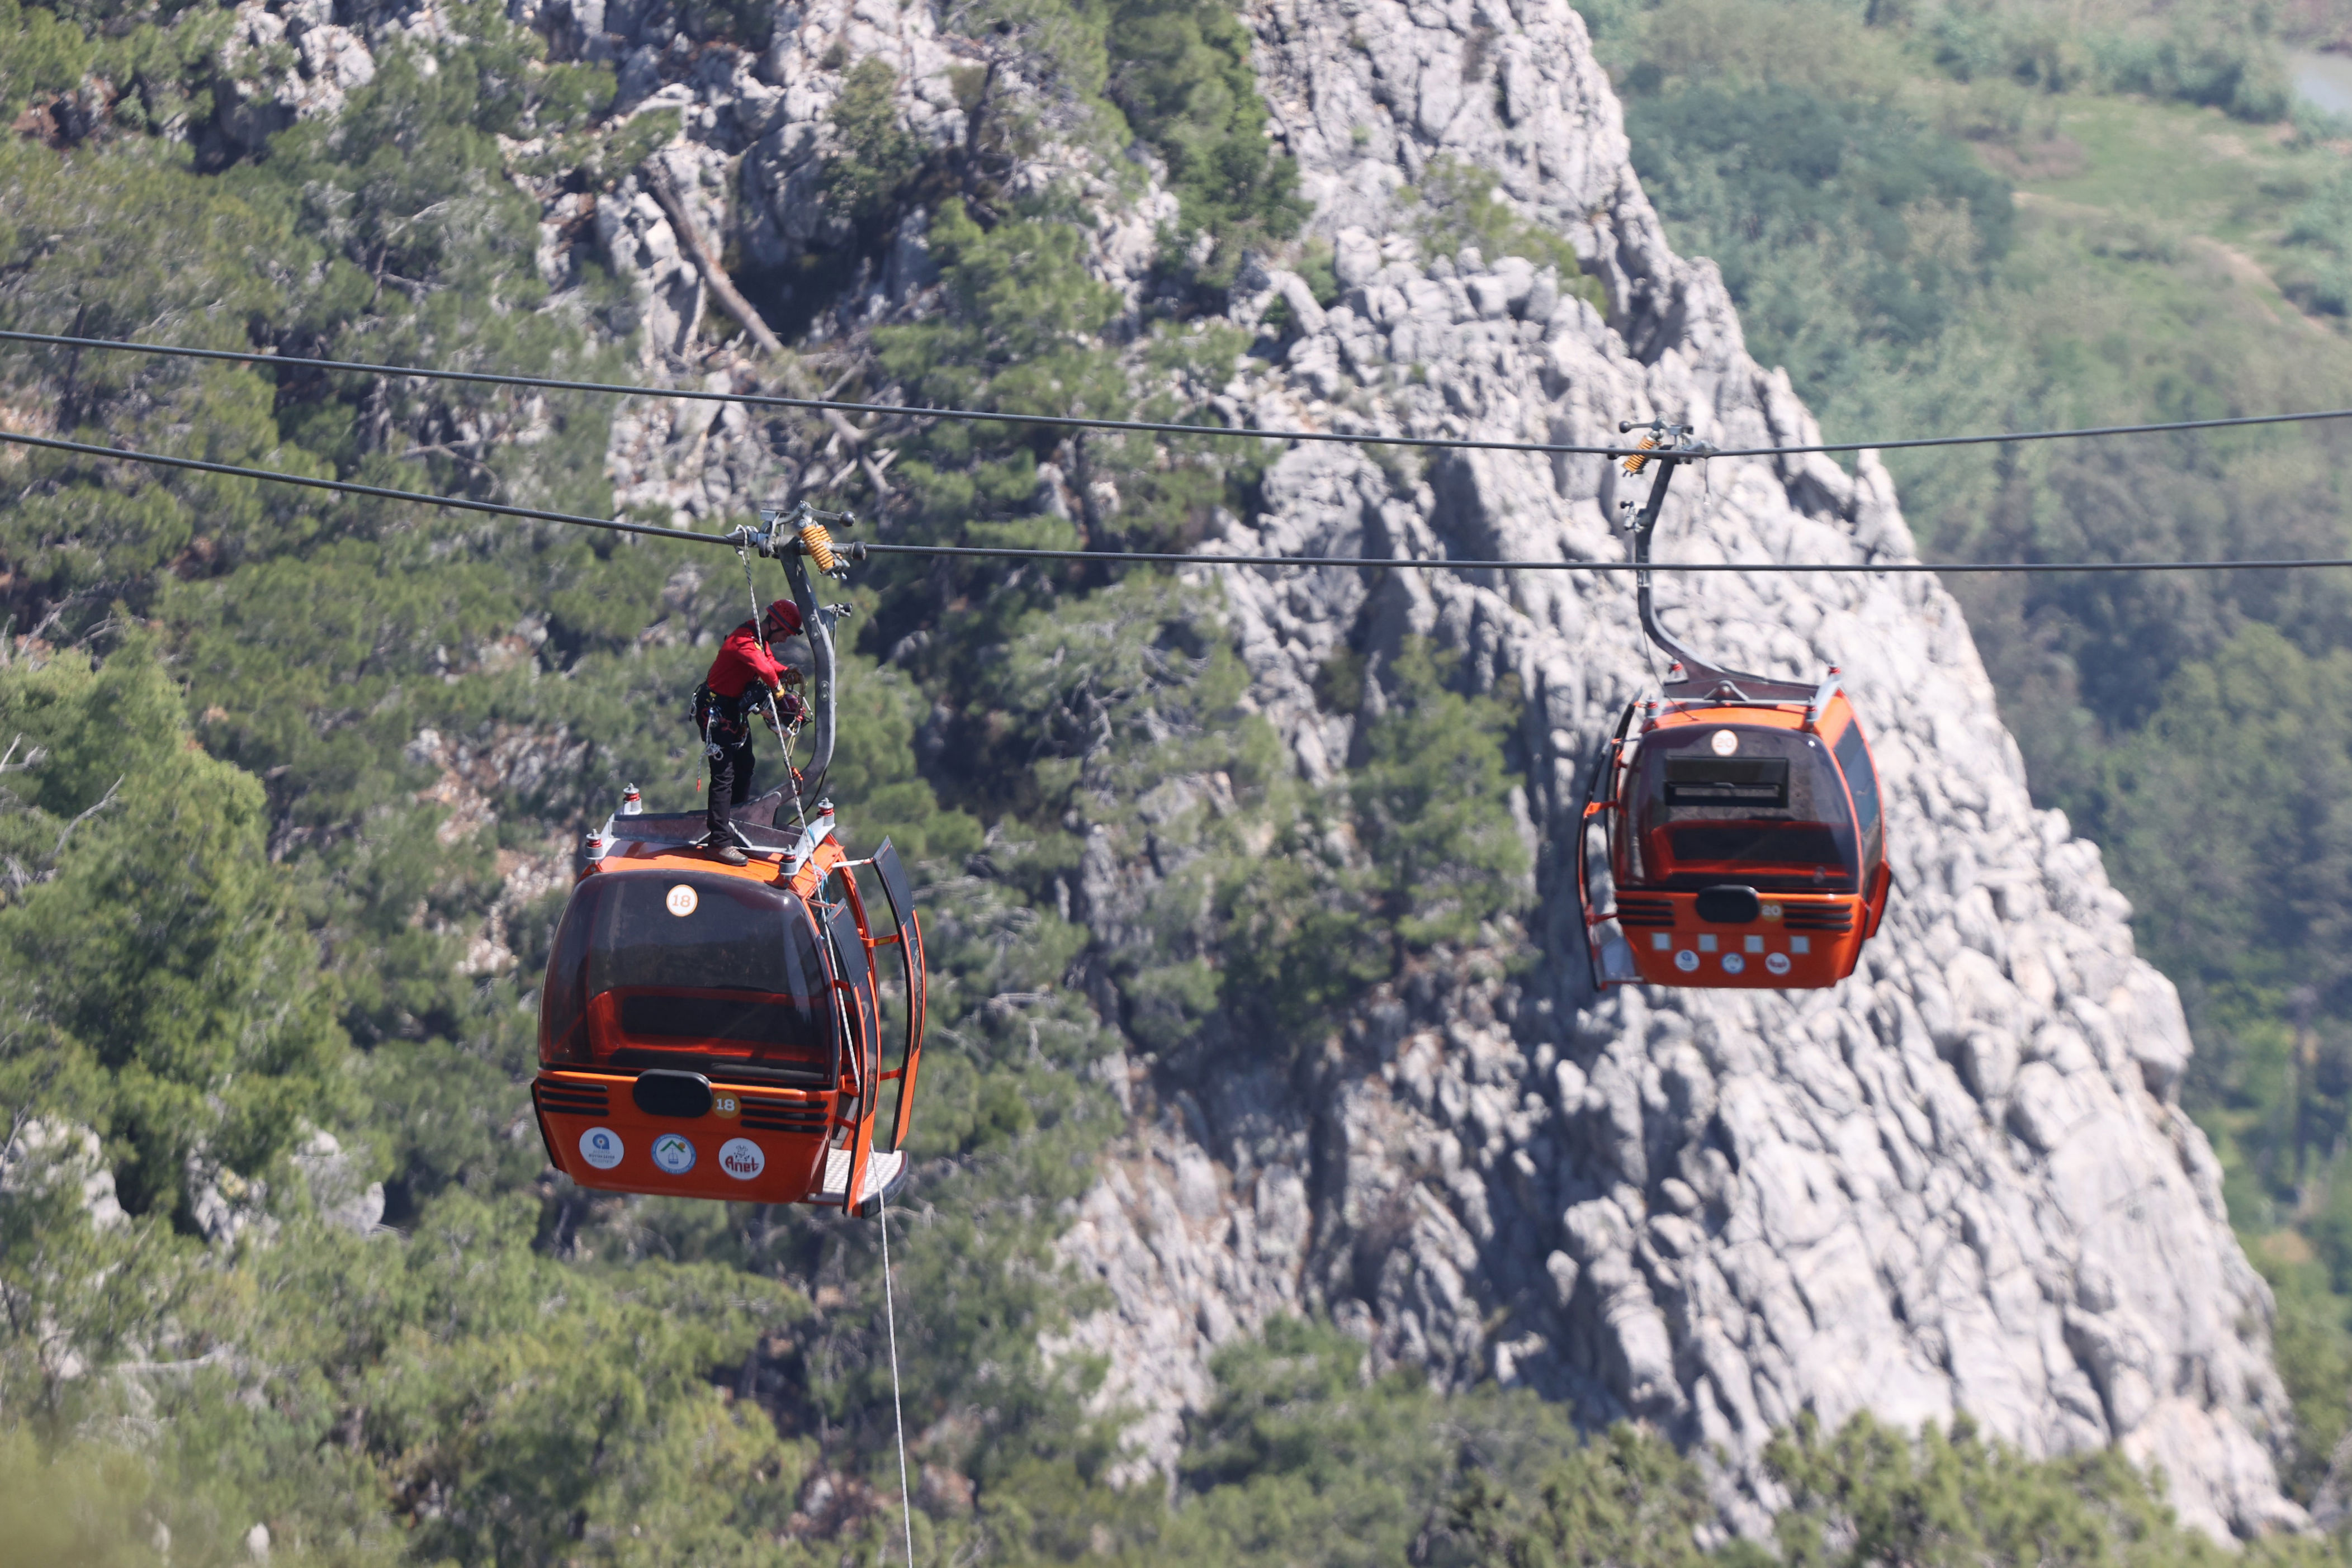 turkey cable car accident leaves one dead and 40 passengers stranded above mountain